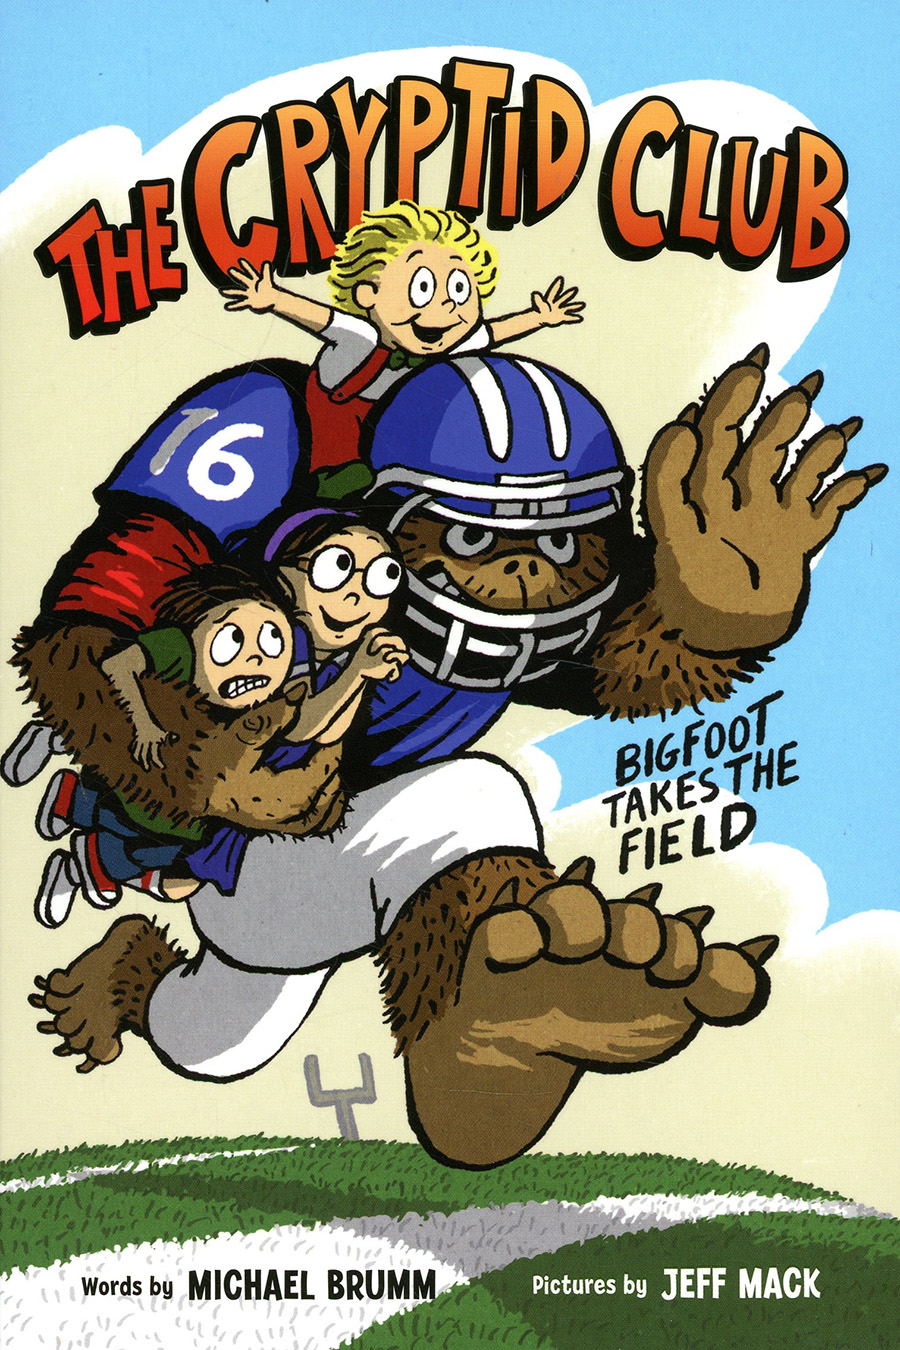 Cryptid Club Vol 1 Bigfoot Takes The Field TP